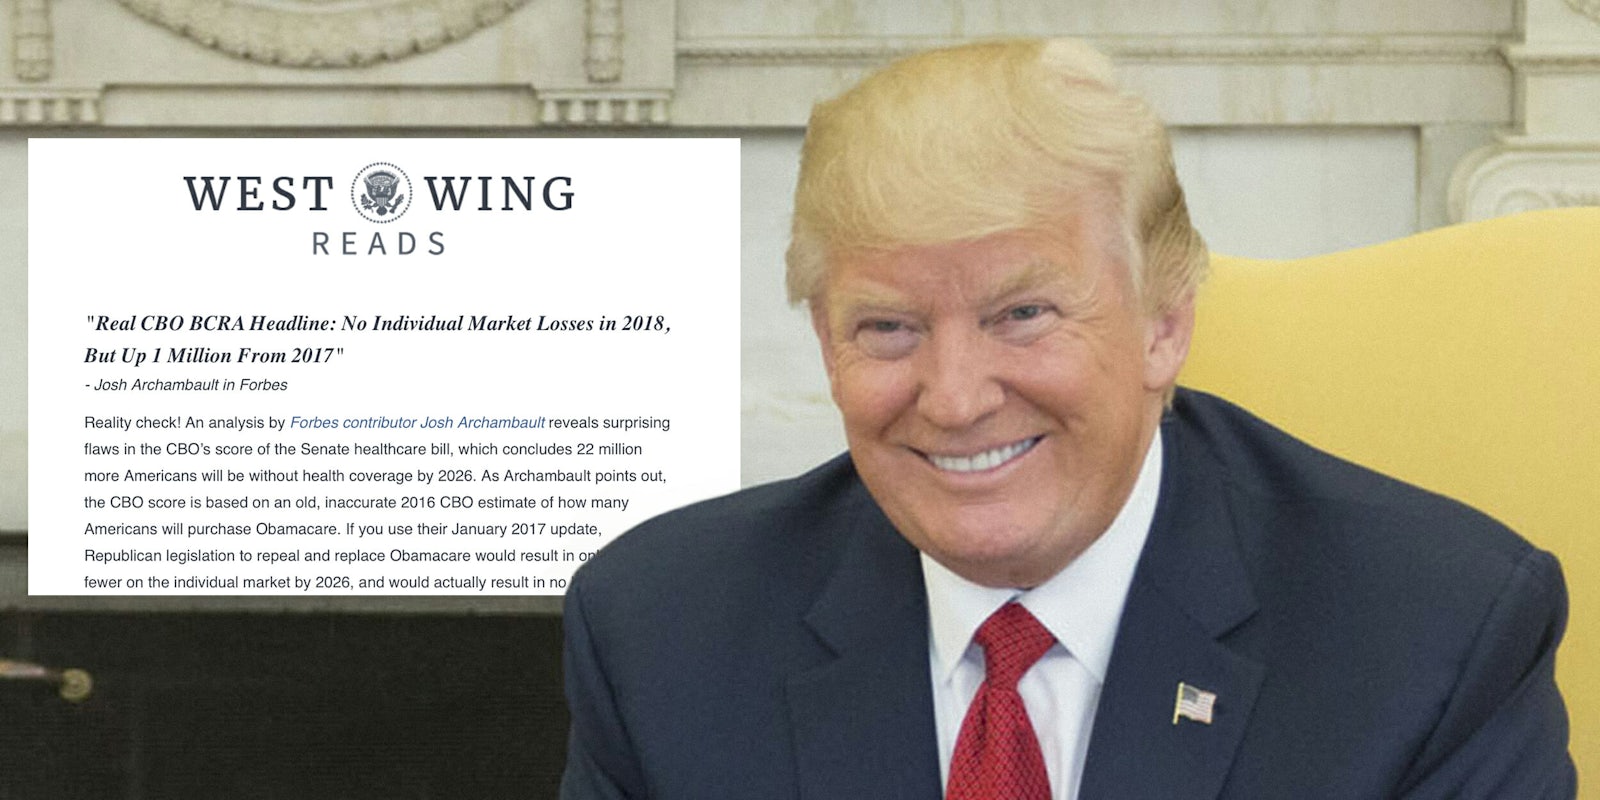 Donald Trump West Wing Reads newsletter